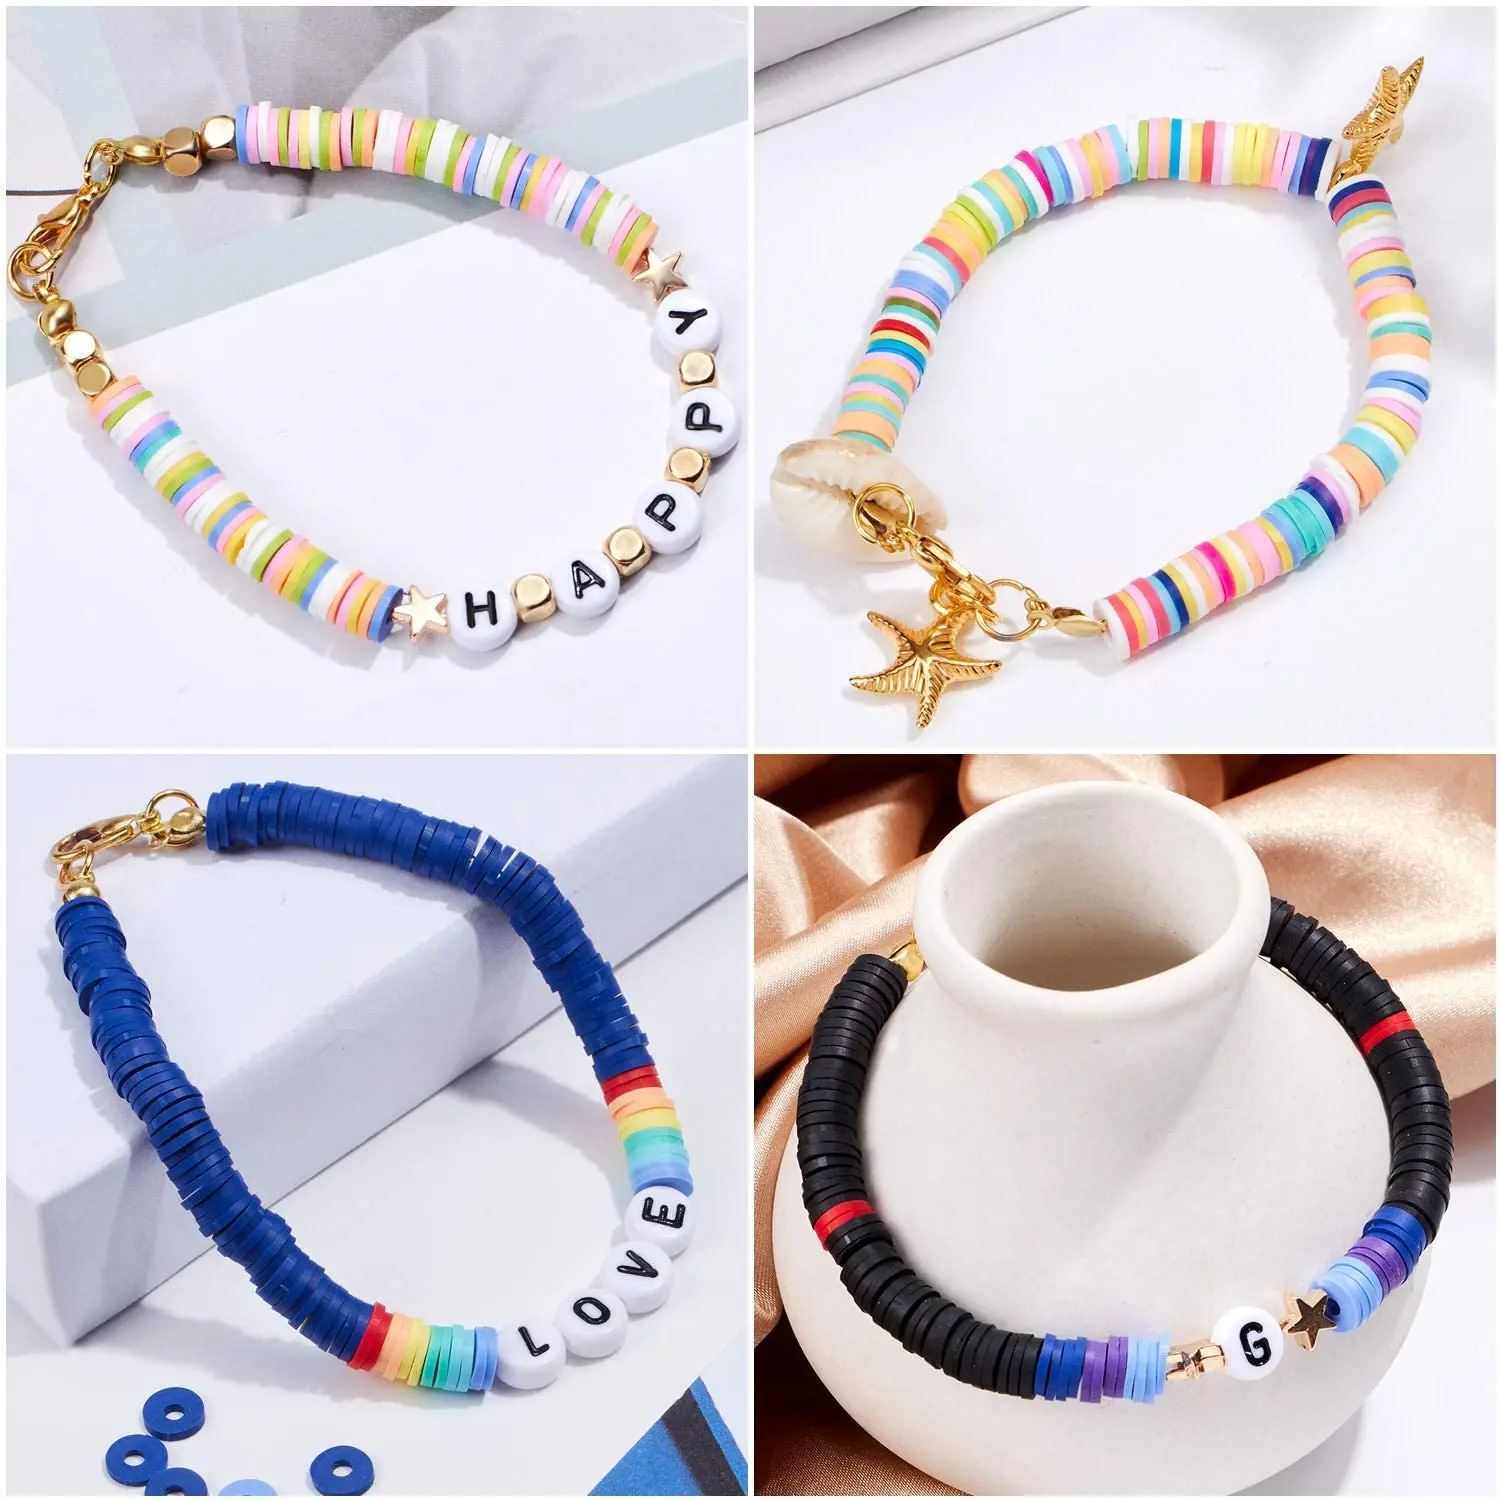 4050 Pcs Clay Beads Kit for Making Bracelets Flat Polymer Beads Jewelry Making Set with Cat Pendant Charms for Girls DIY